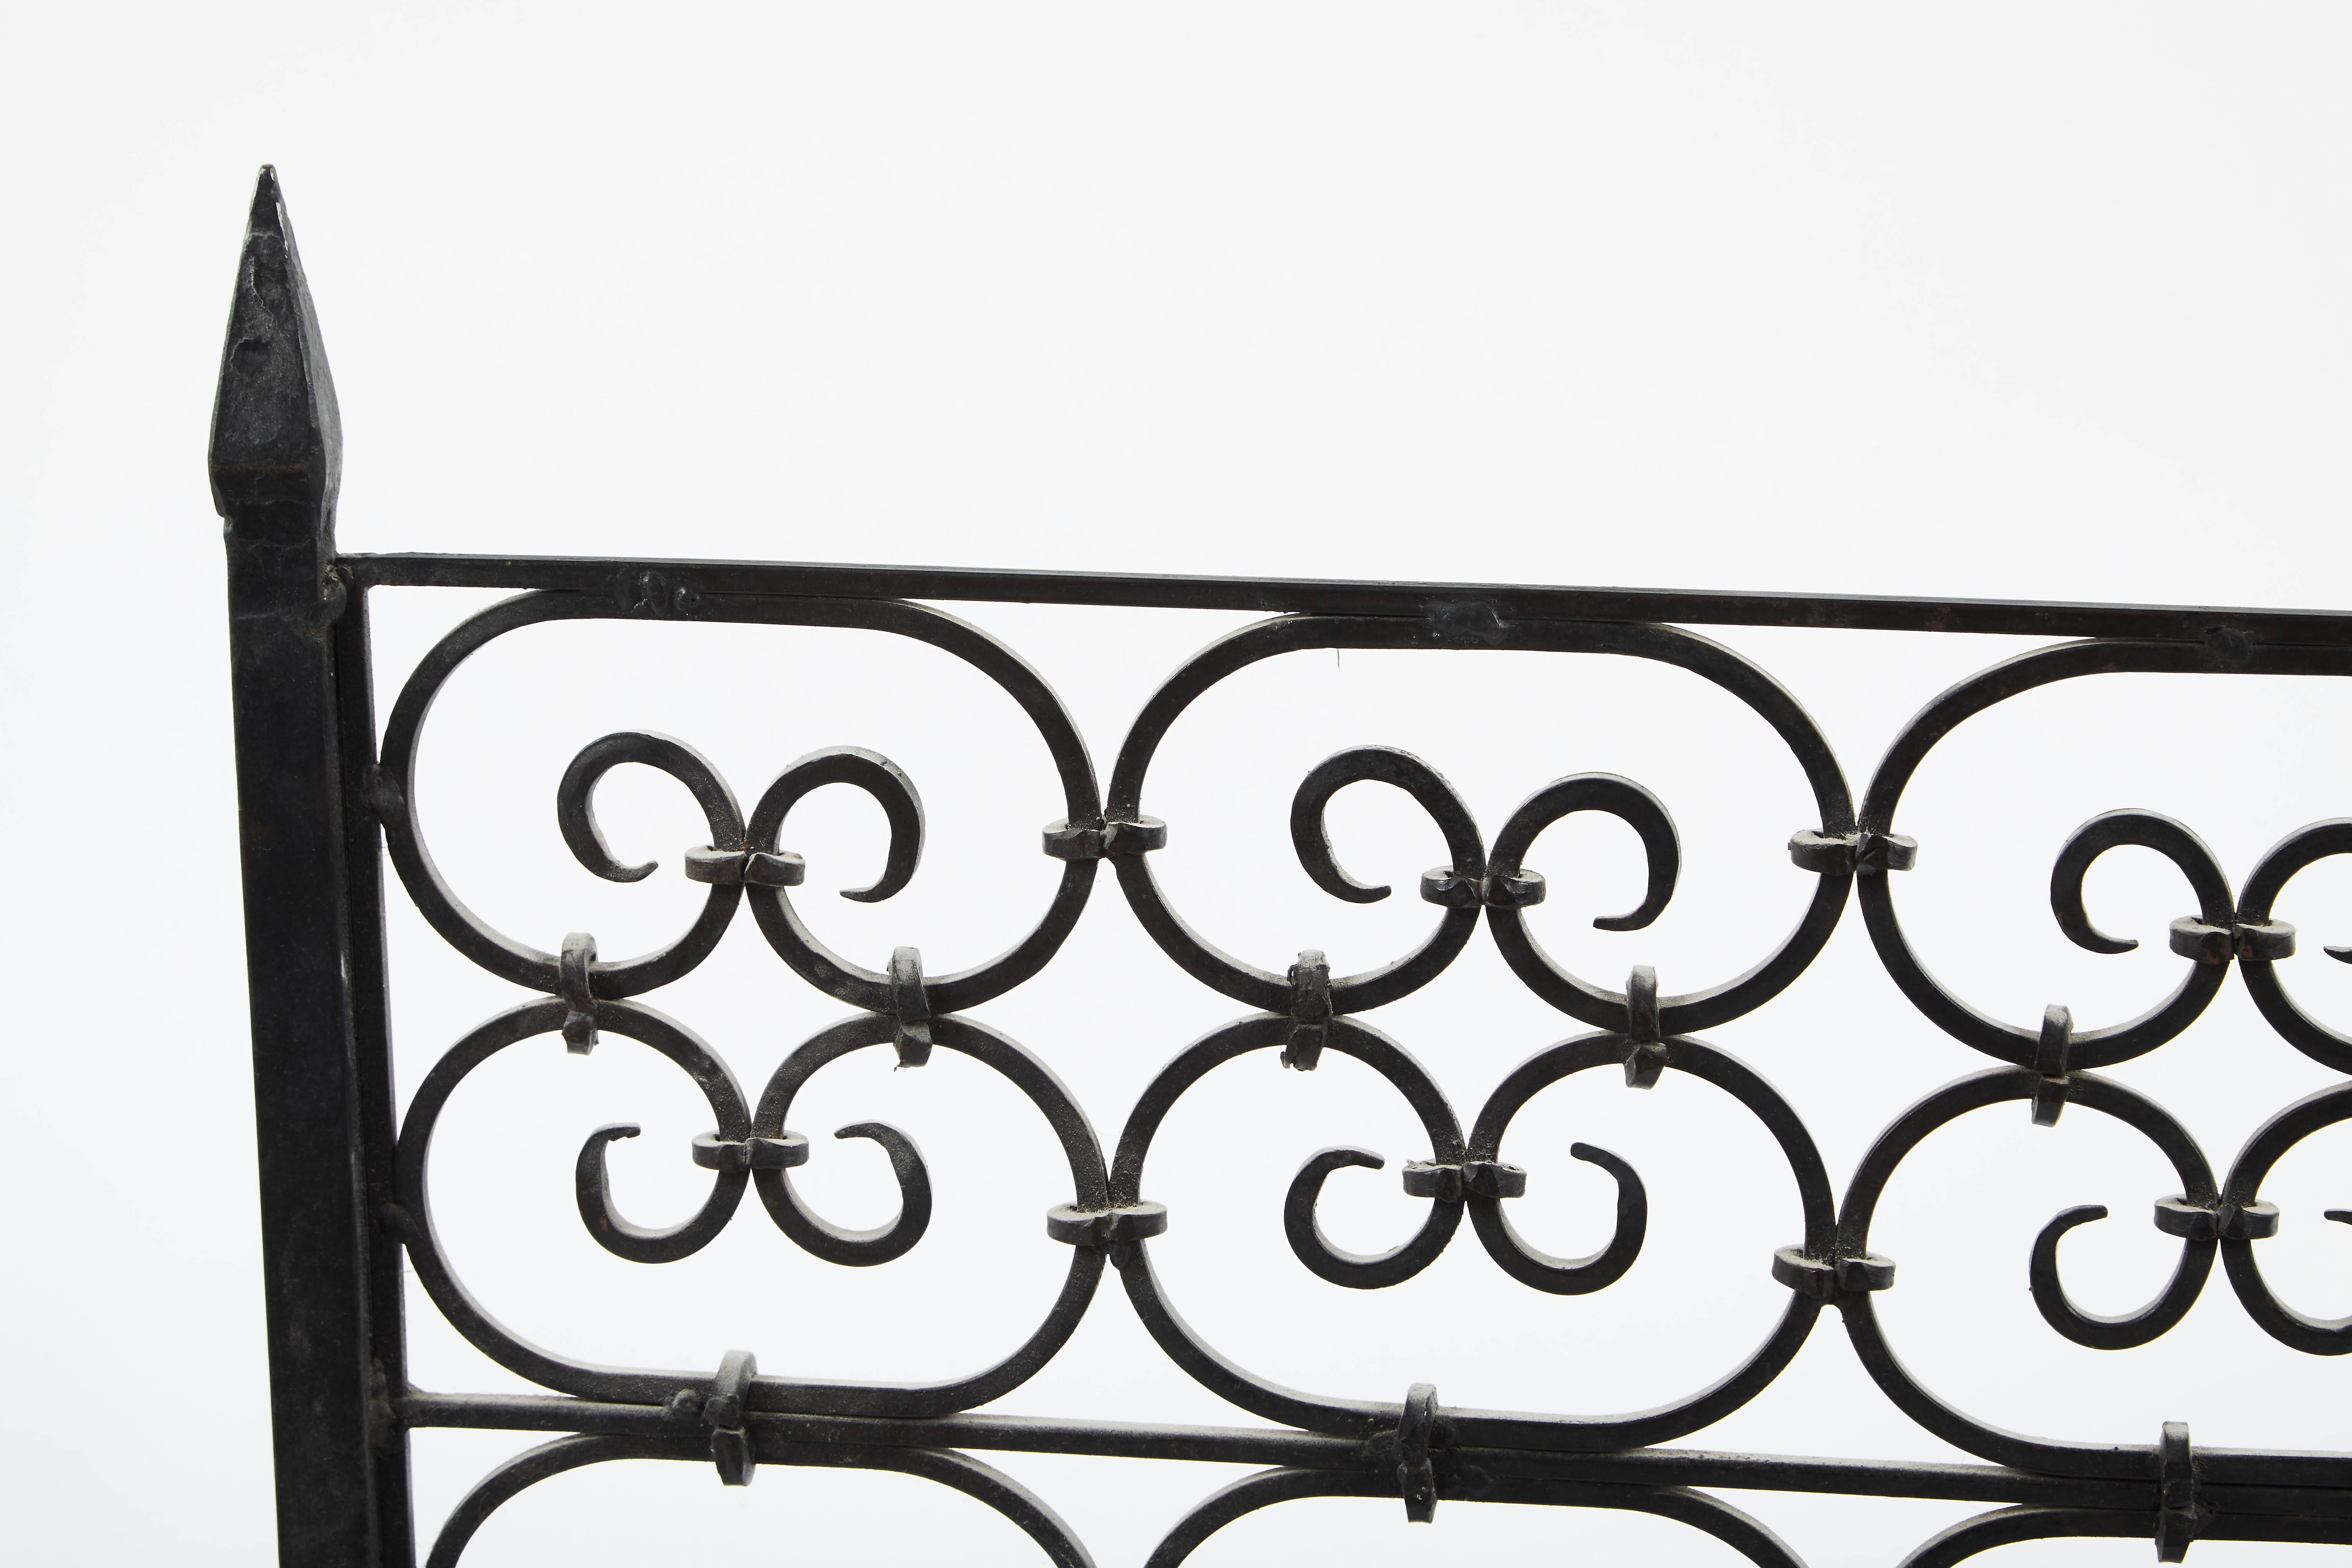 Free standing Spanish wrought iron fireplace screen with scroll details and pointed finials, c. 1920.

PLEASE NOTE: LONG SHIPPING LEAD TIME DUE TO COVID-19 RESTRICTIONS

